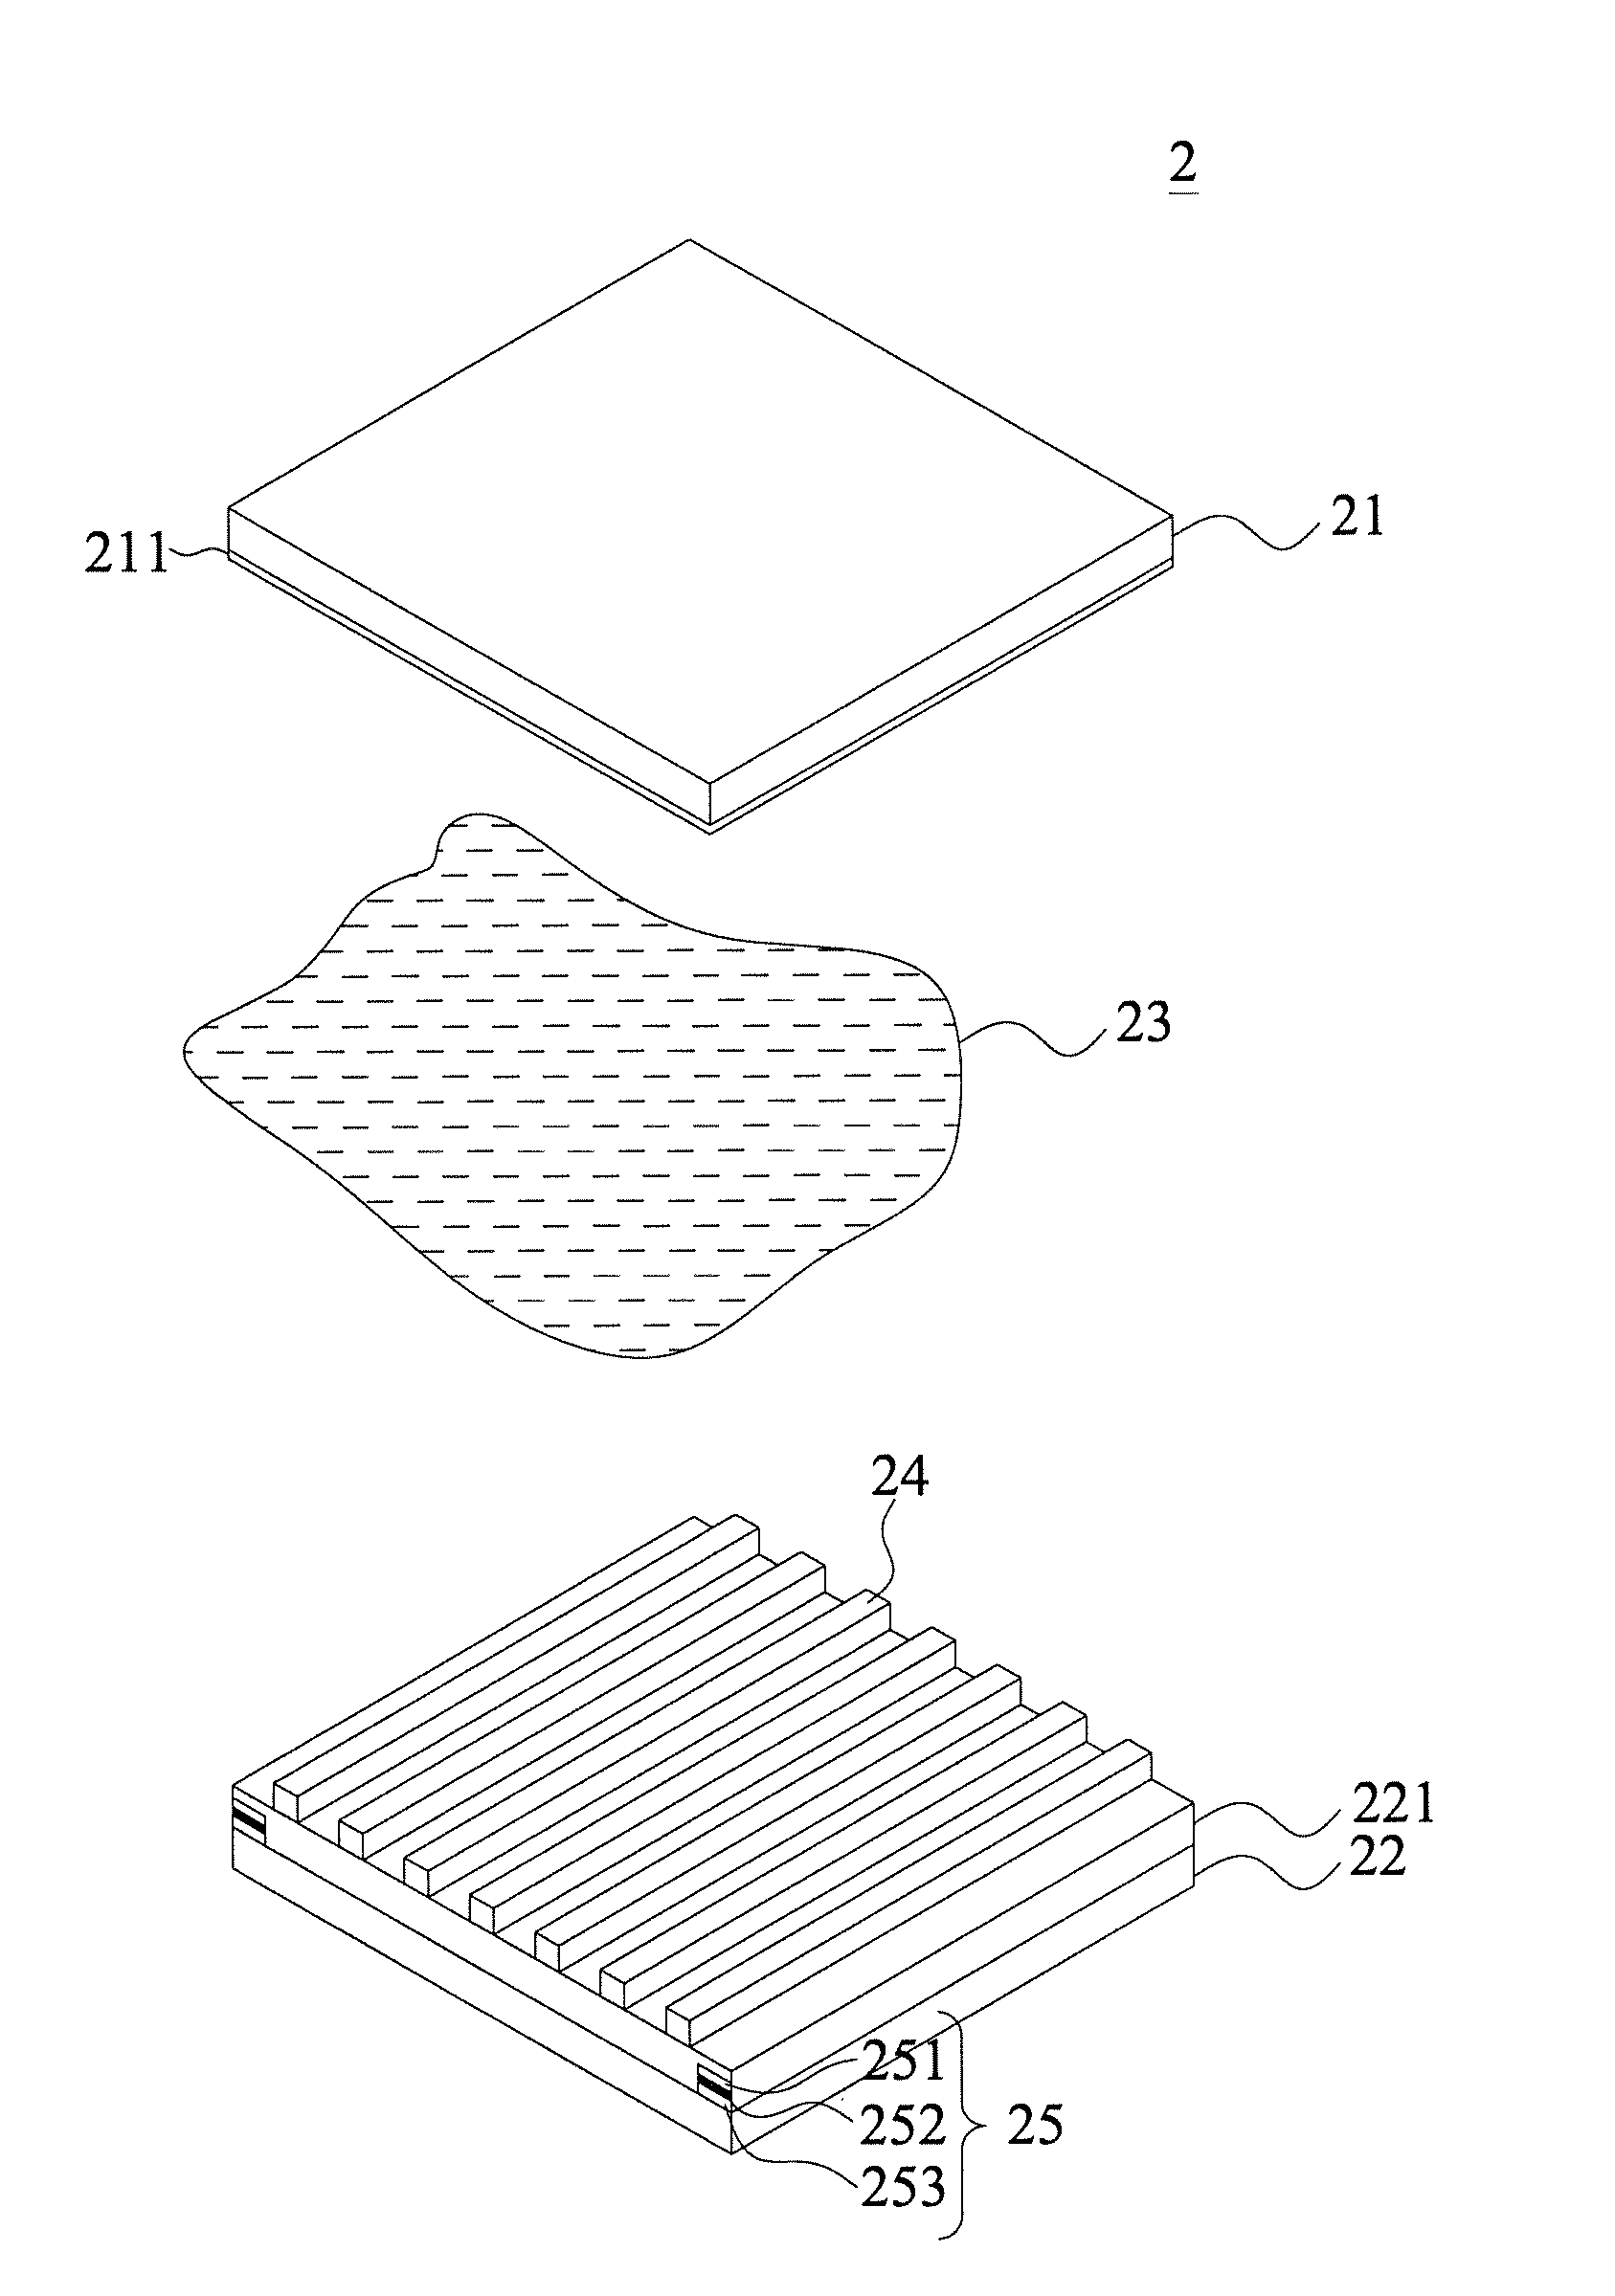 Grating structure of 2d/3d switching display device